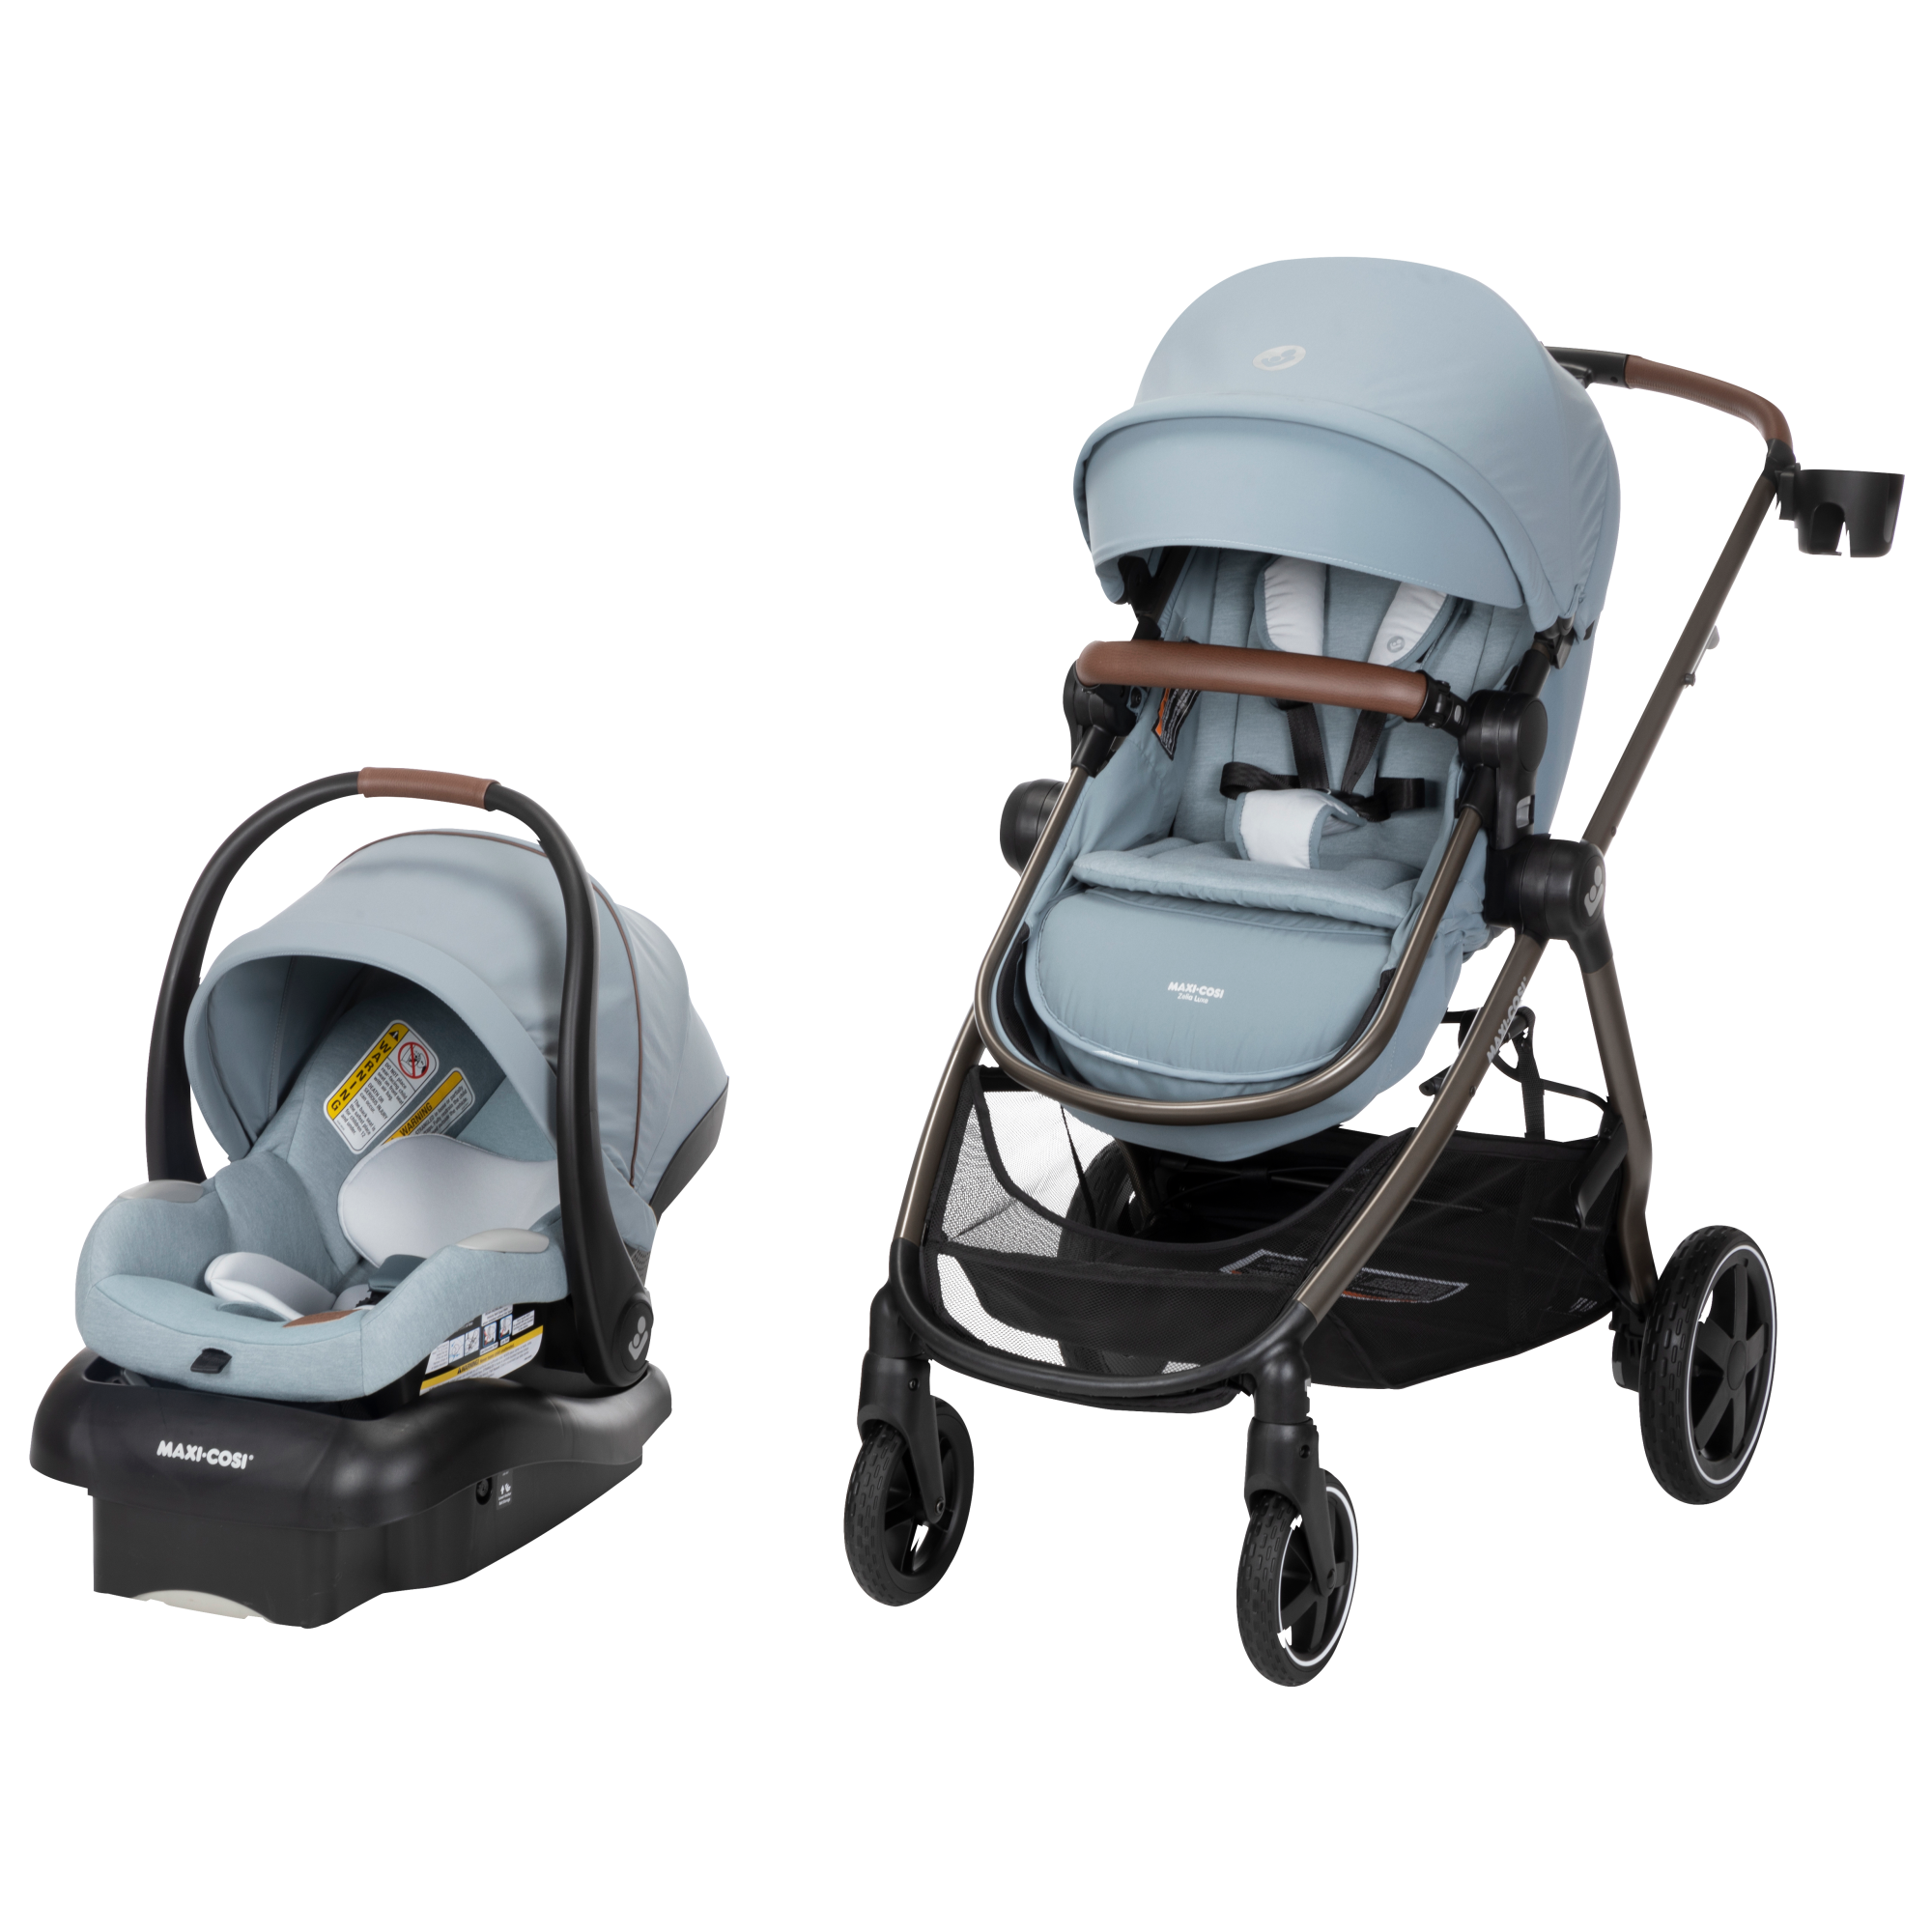 Zelia™² Luxe 5-in-1 Modular Travel System - New Hope Grey - 45 degree angle view of left side